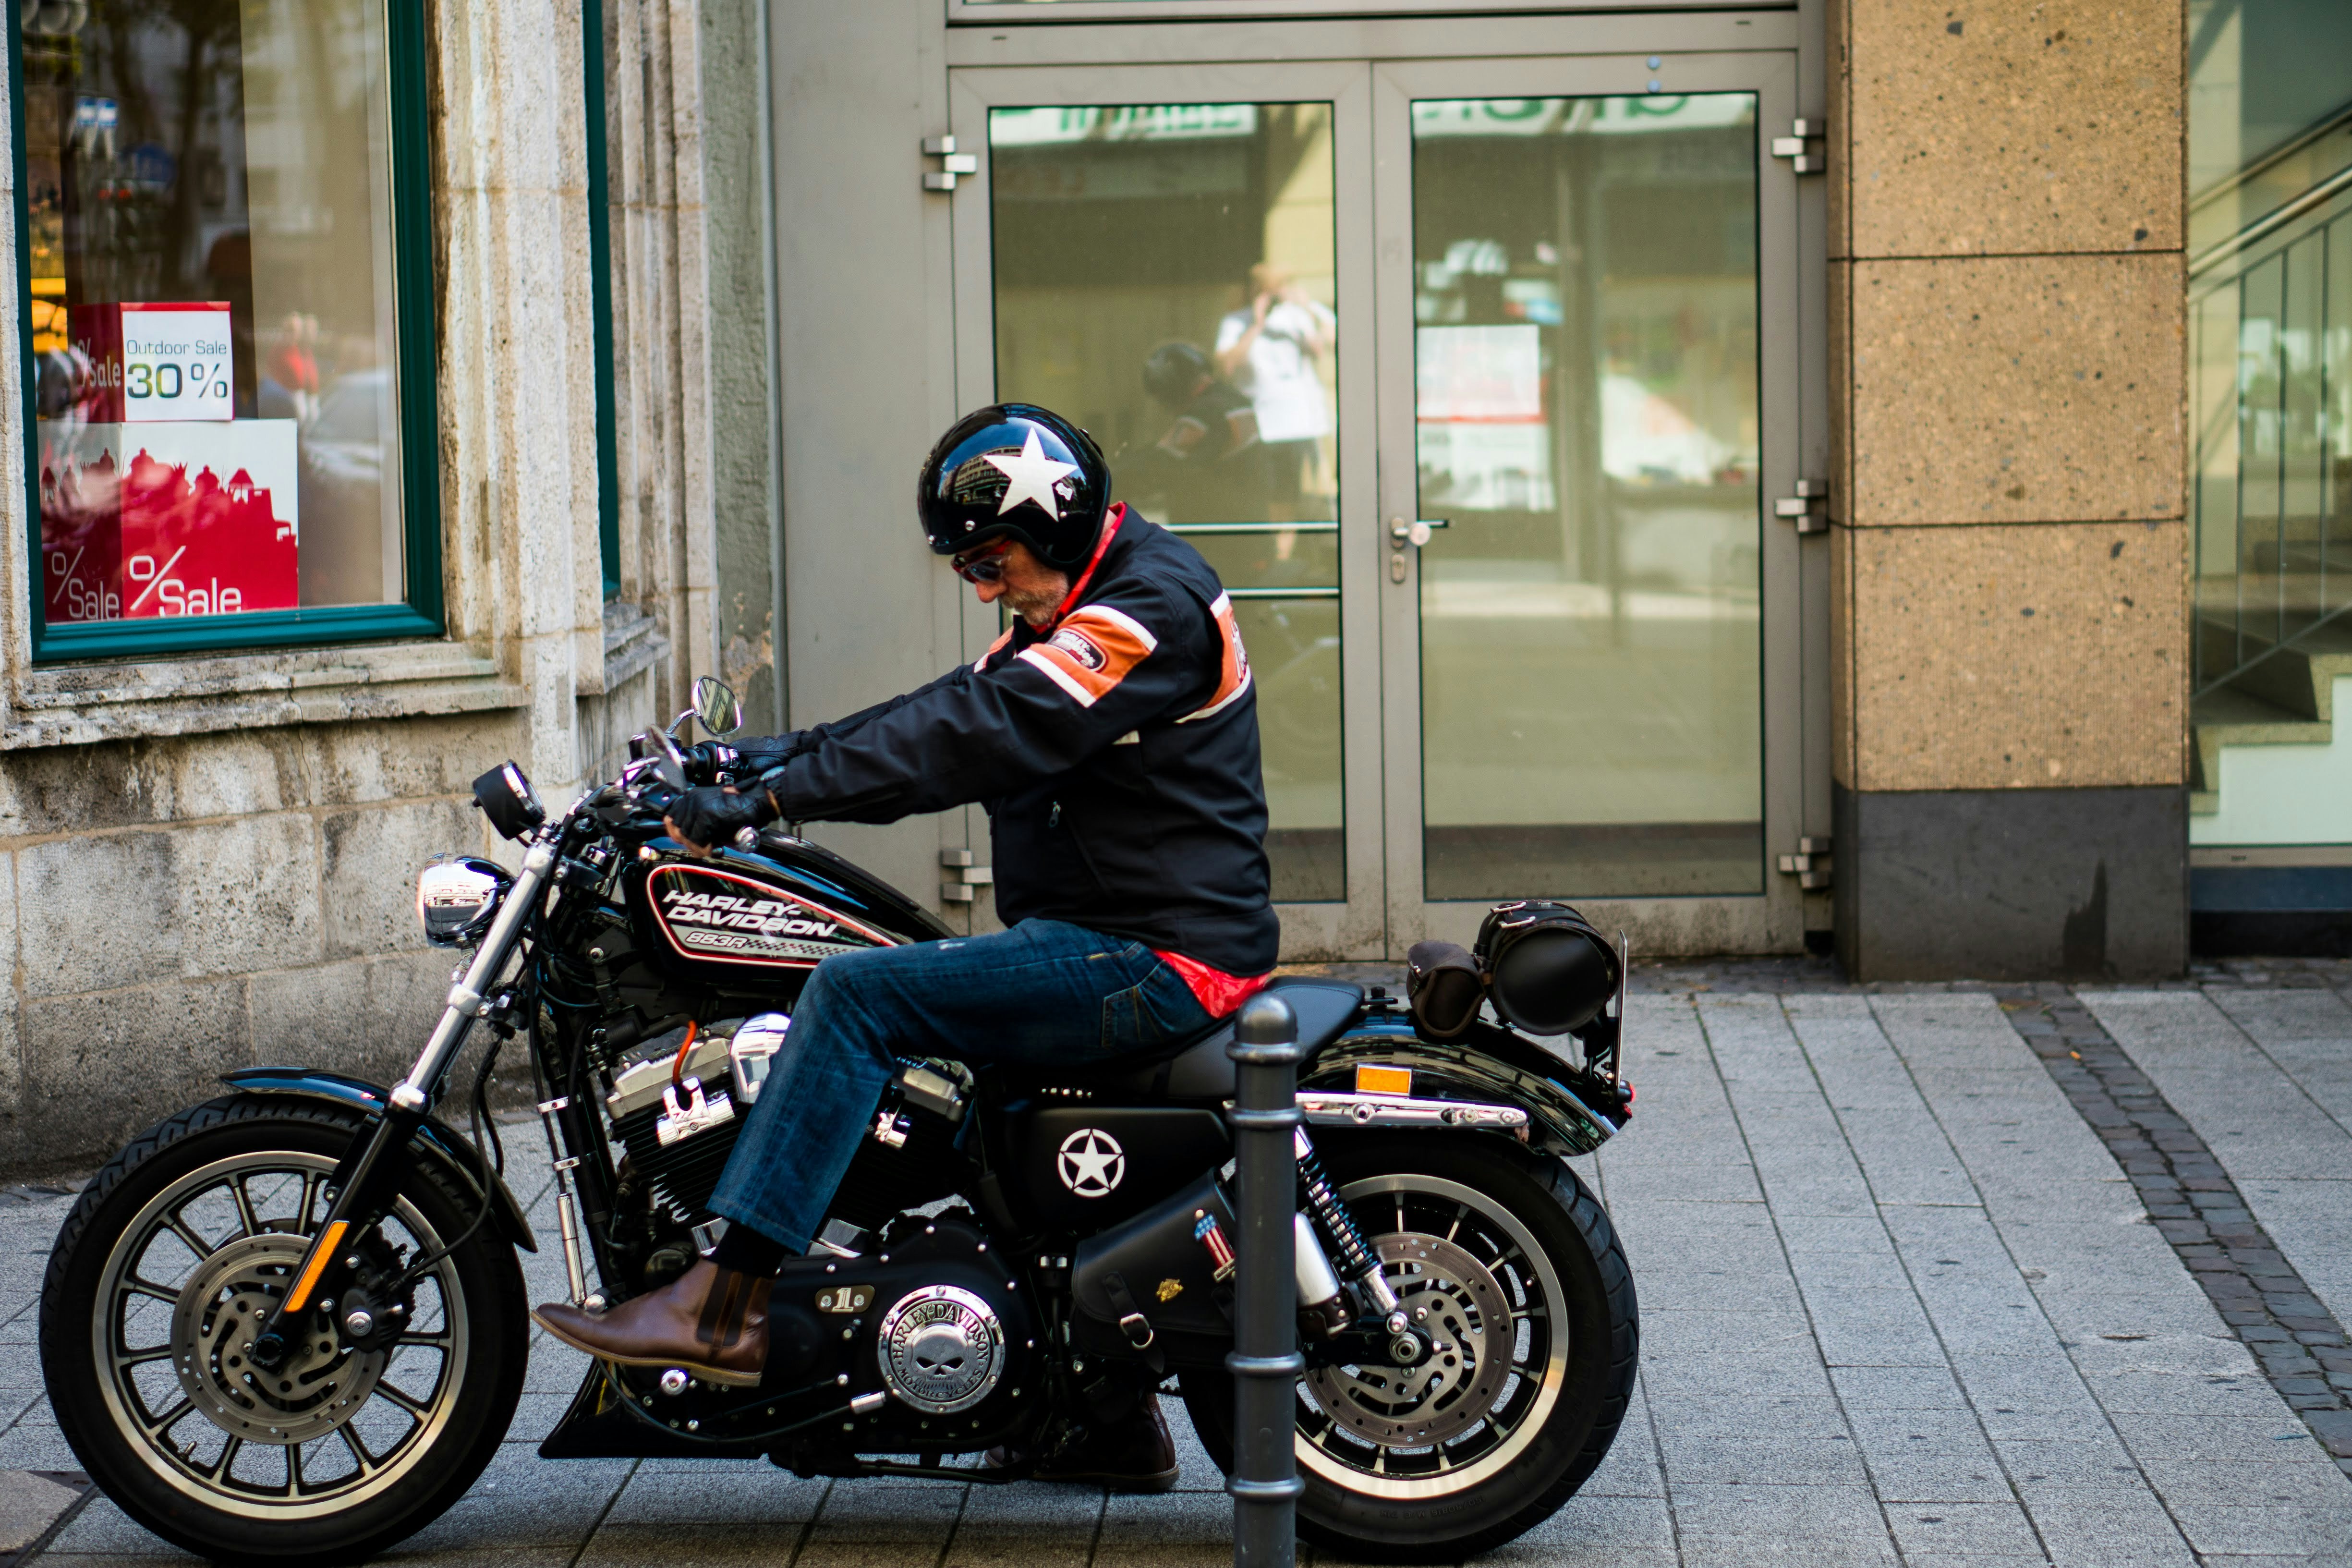 Spotted parking his Harley in the heart of Cologne, this guy just oozes cool.